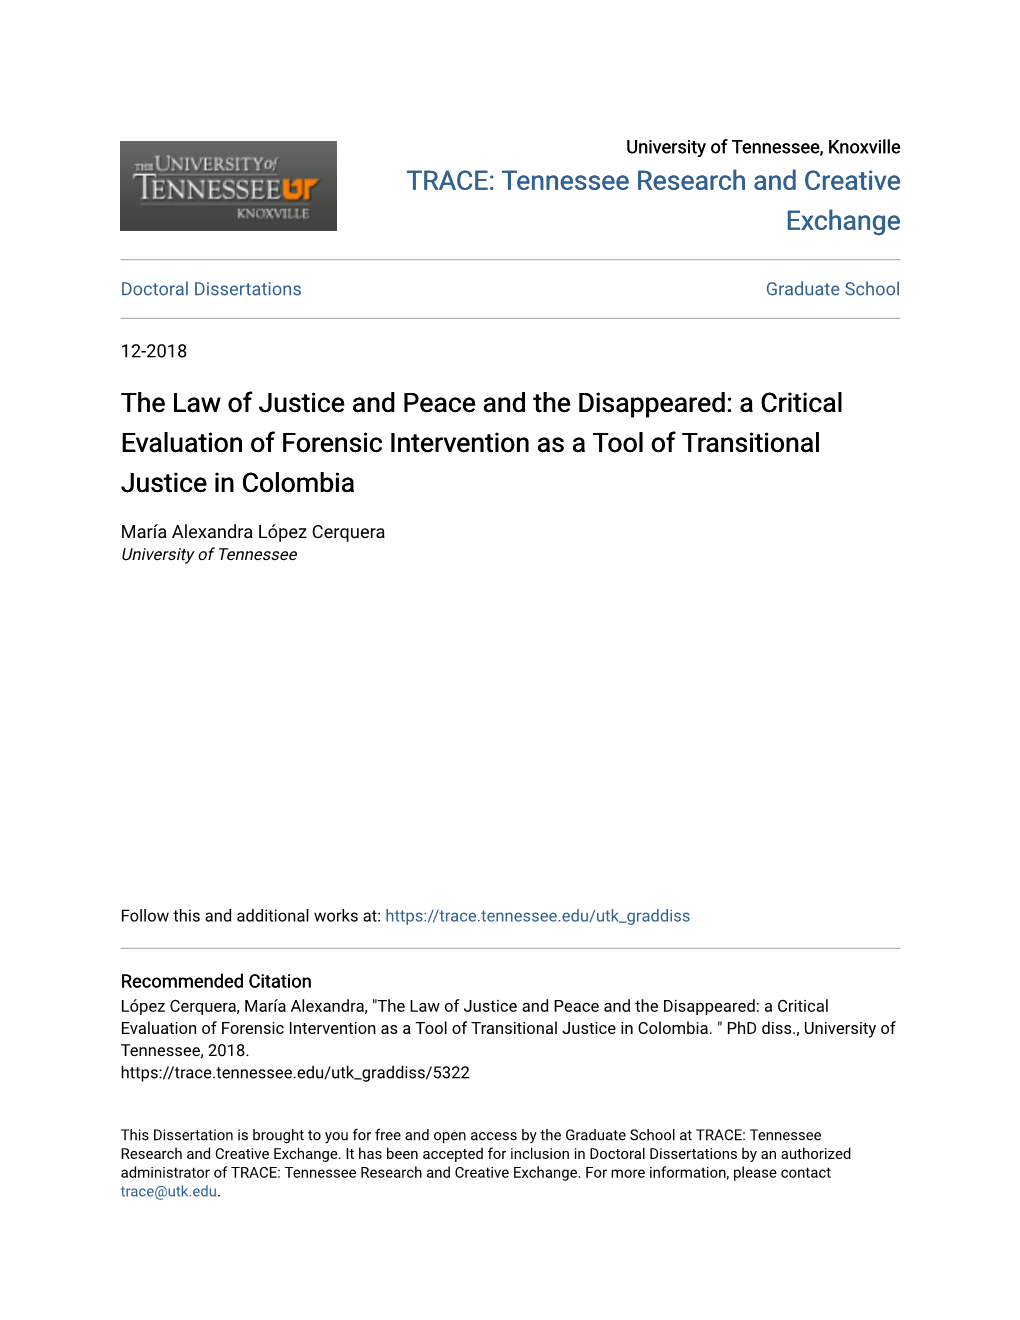 The Law of Justice and Peace and the Disappeared: a Critical Evaluation of Forensic Intervention As a Tool of Transitional Justice in Colombia